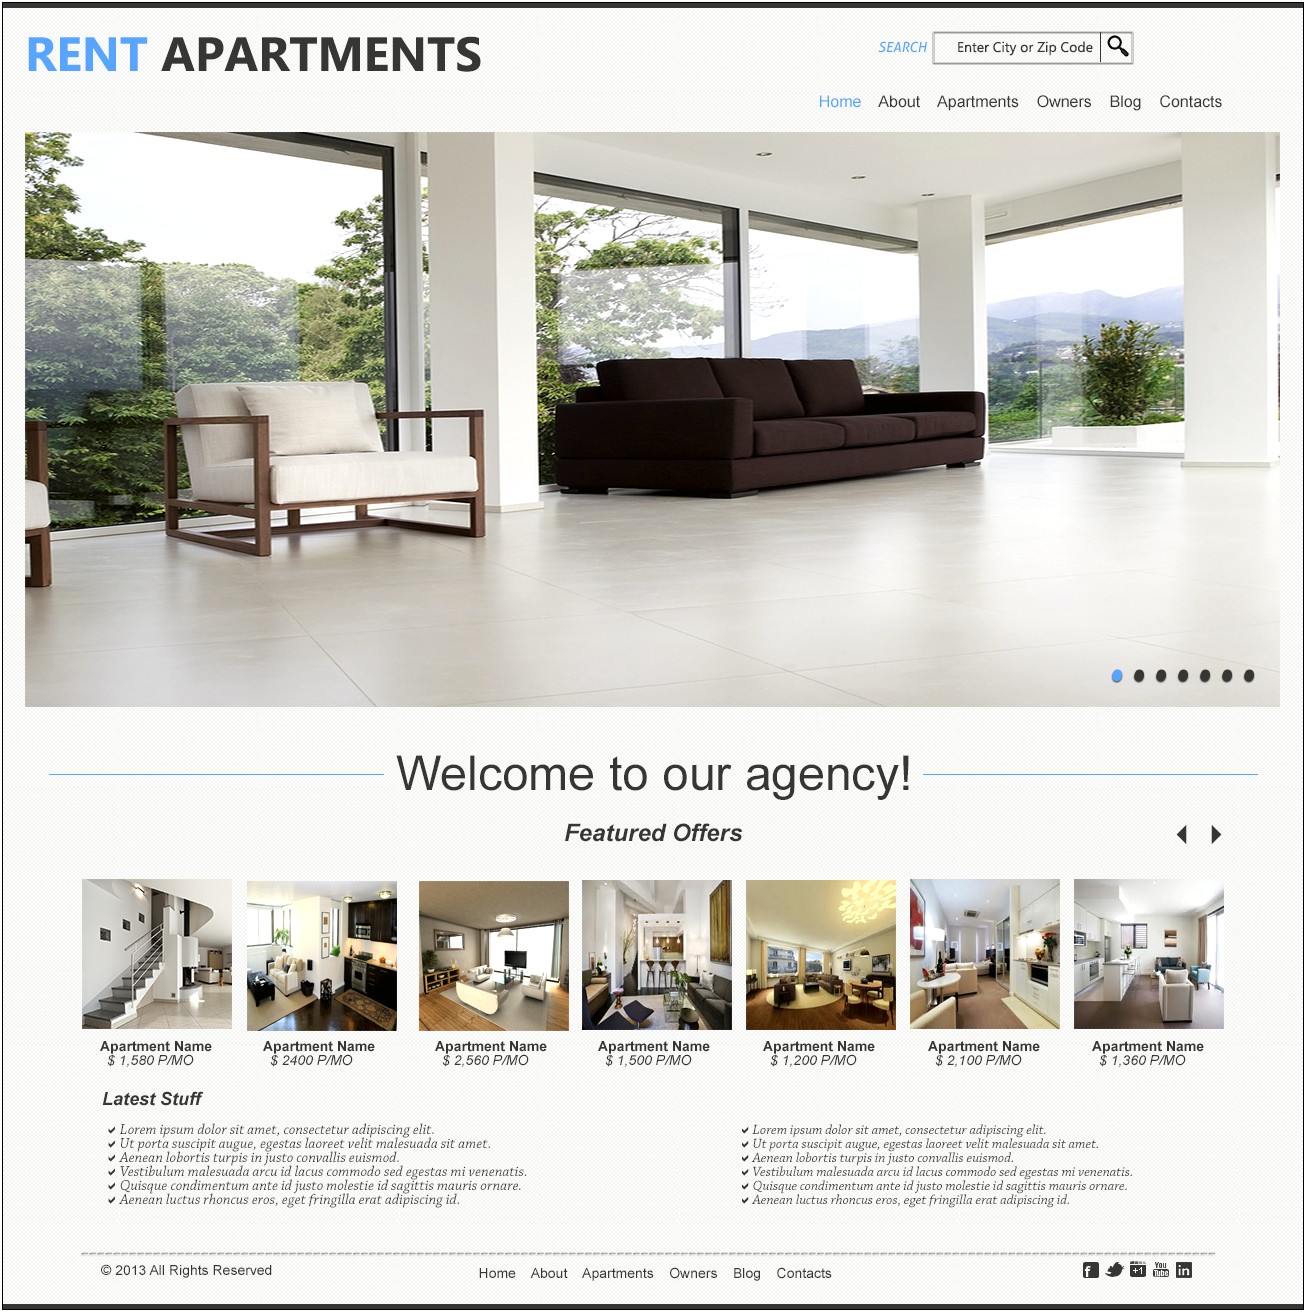 Free Apartment For Rent Sign Template